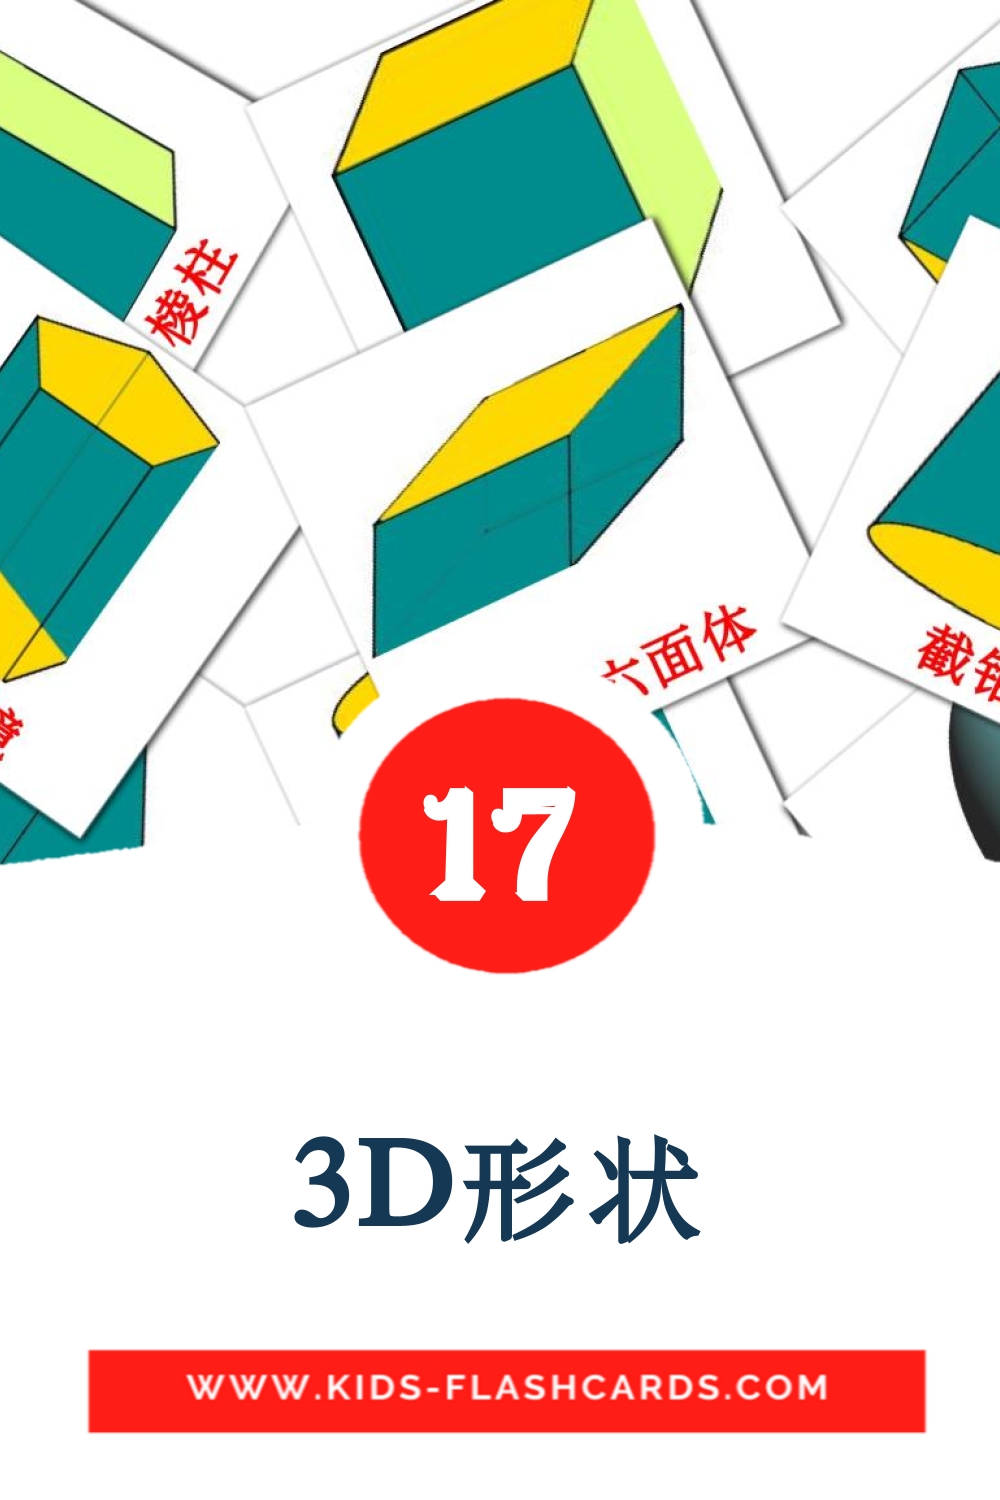 17 3D形状 Picture Cards for Kindergarden in chinese(Simplified)